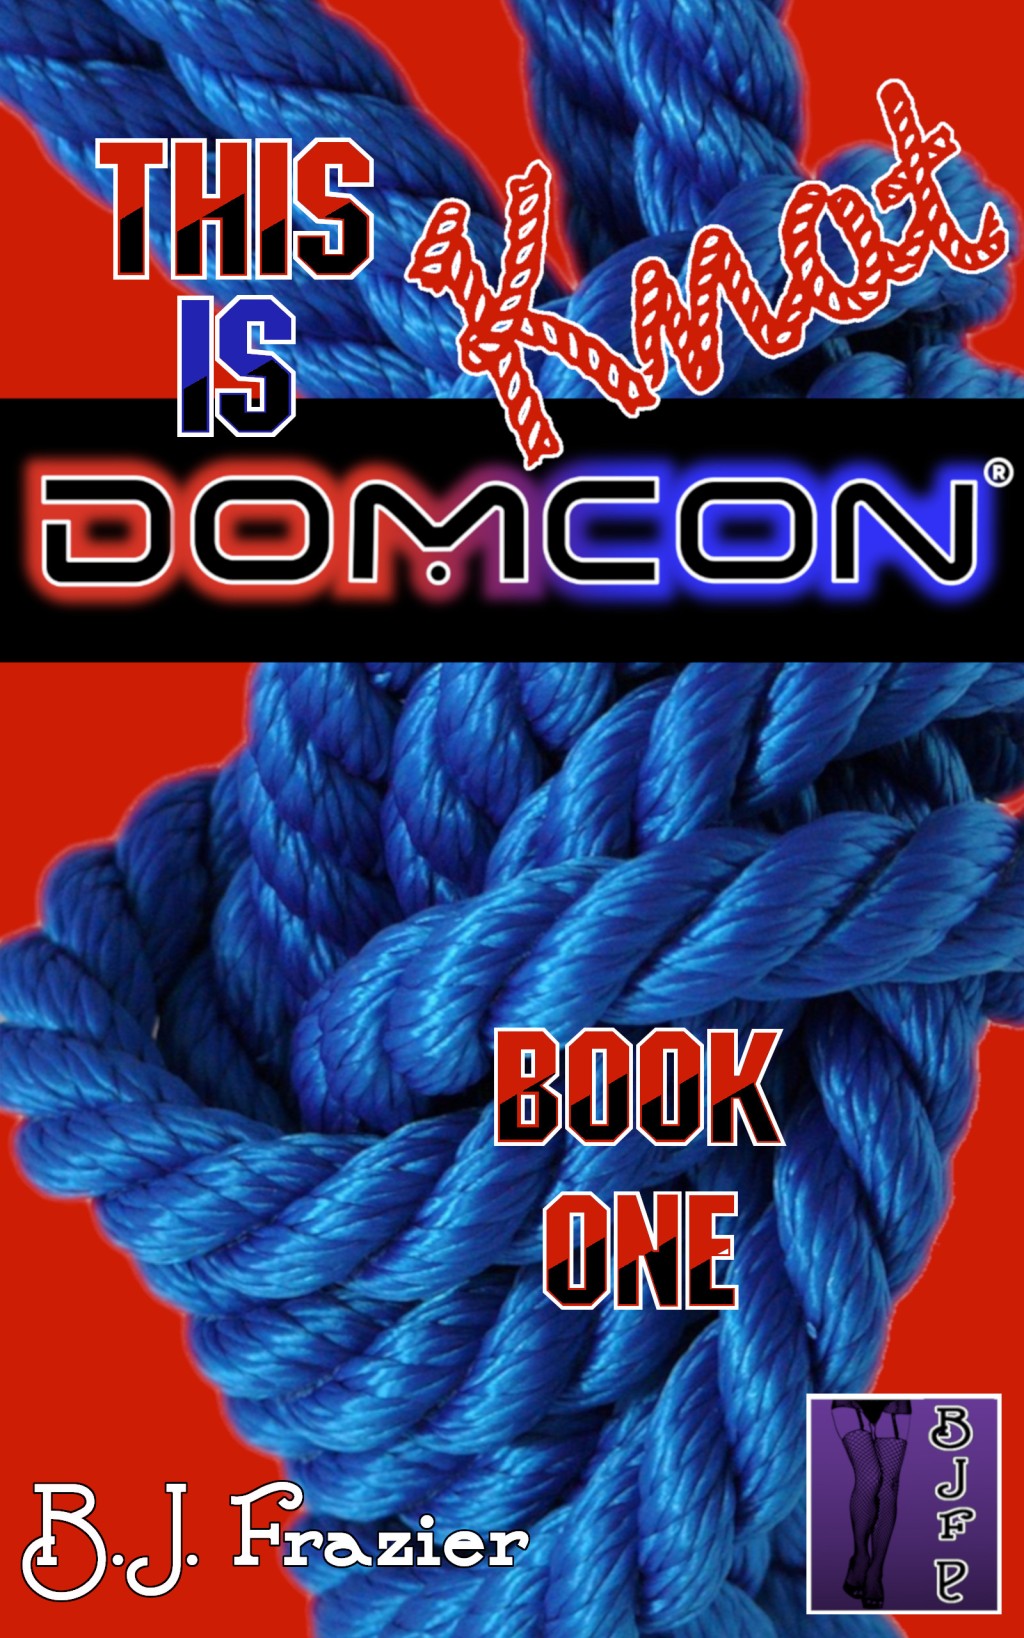 Book Review: This is Knot DomCon – Book One by B.J. Frazier (erotica)